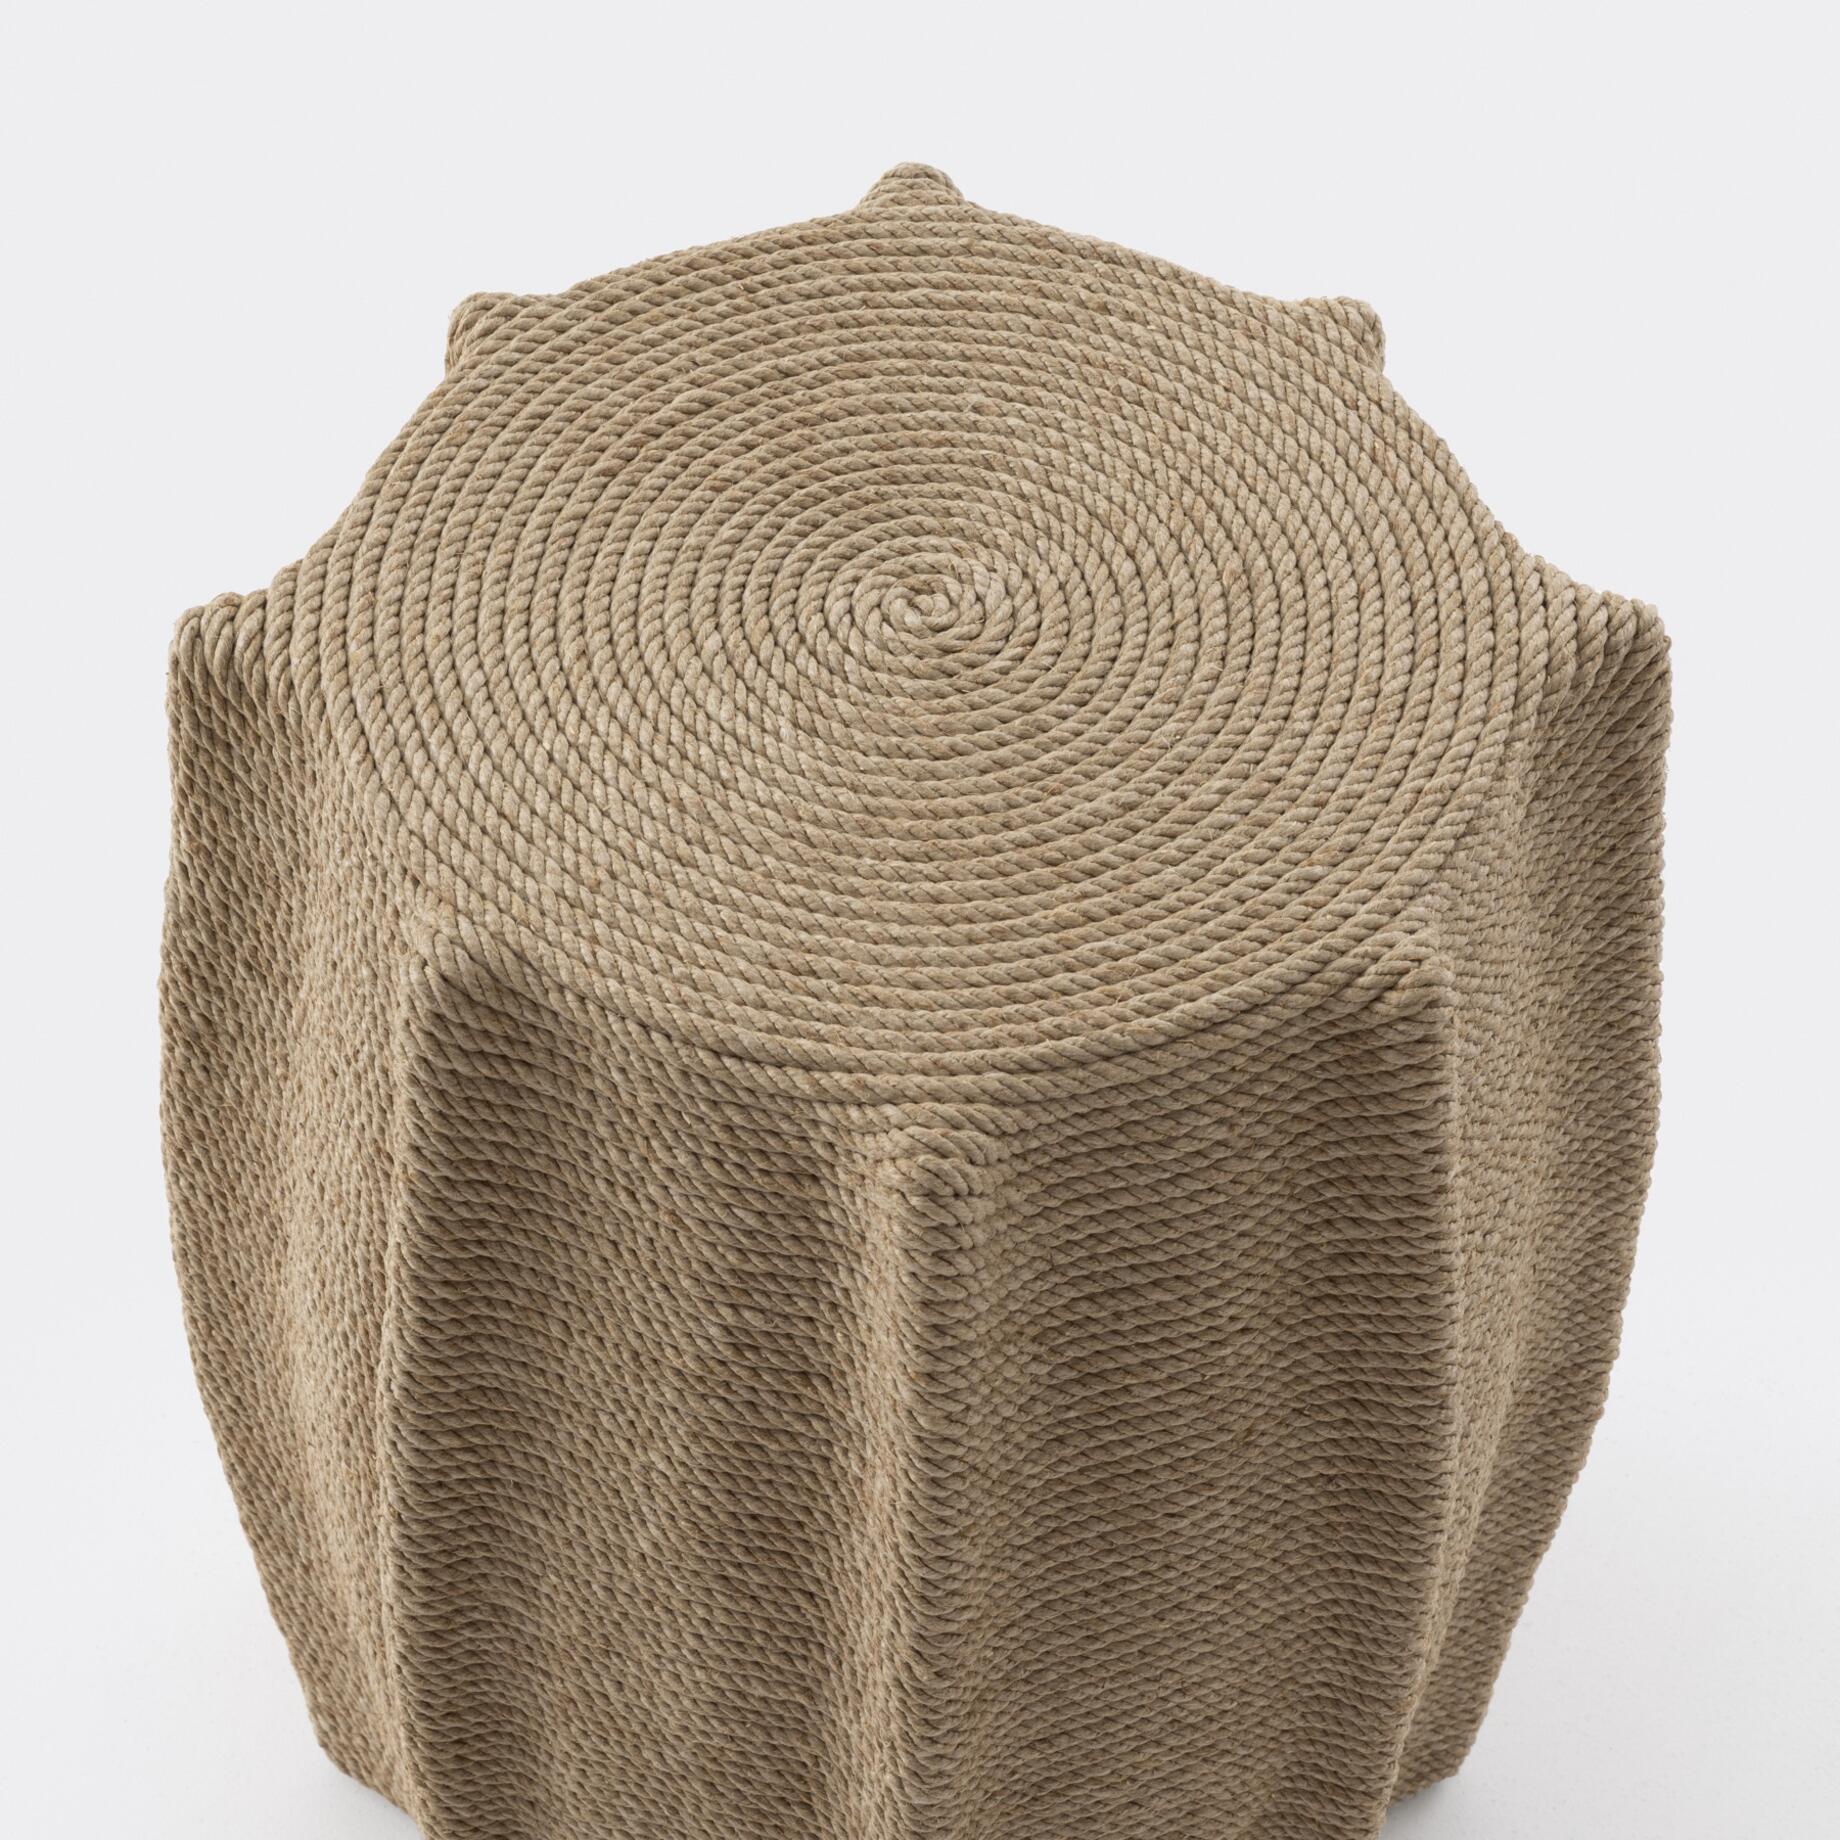 Mionde Side Table, Natural Hemp